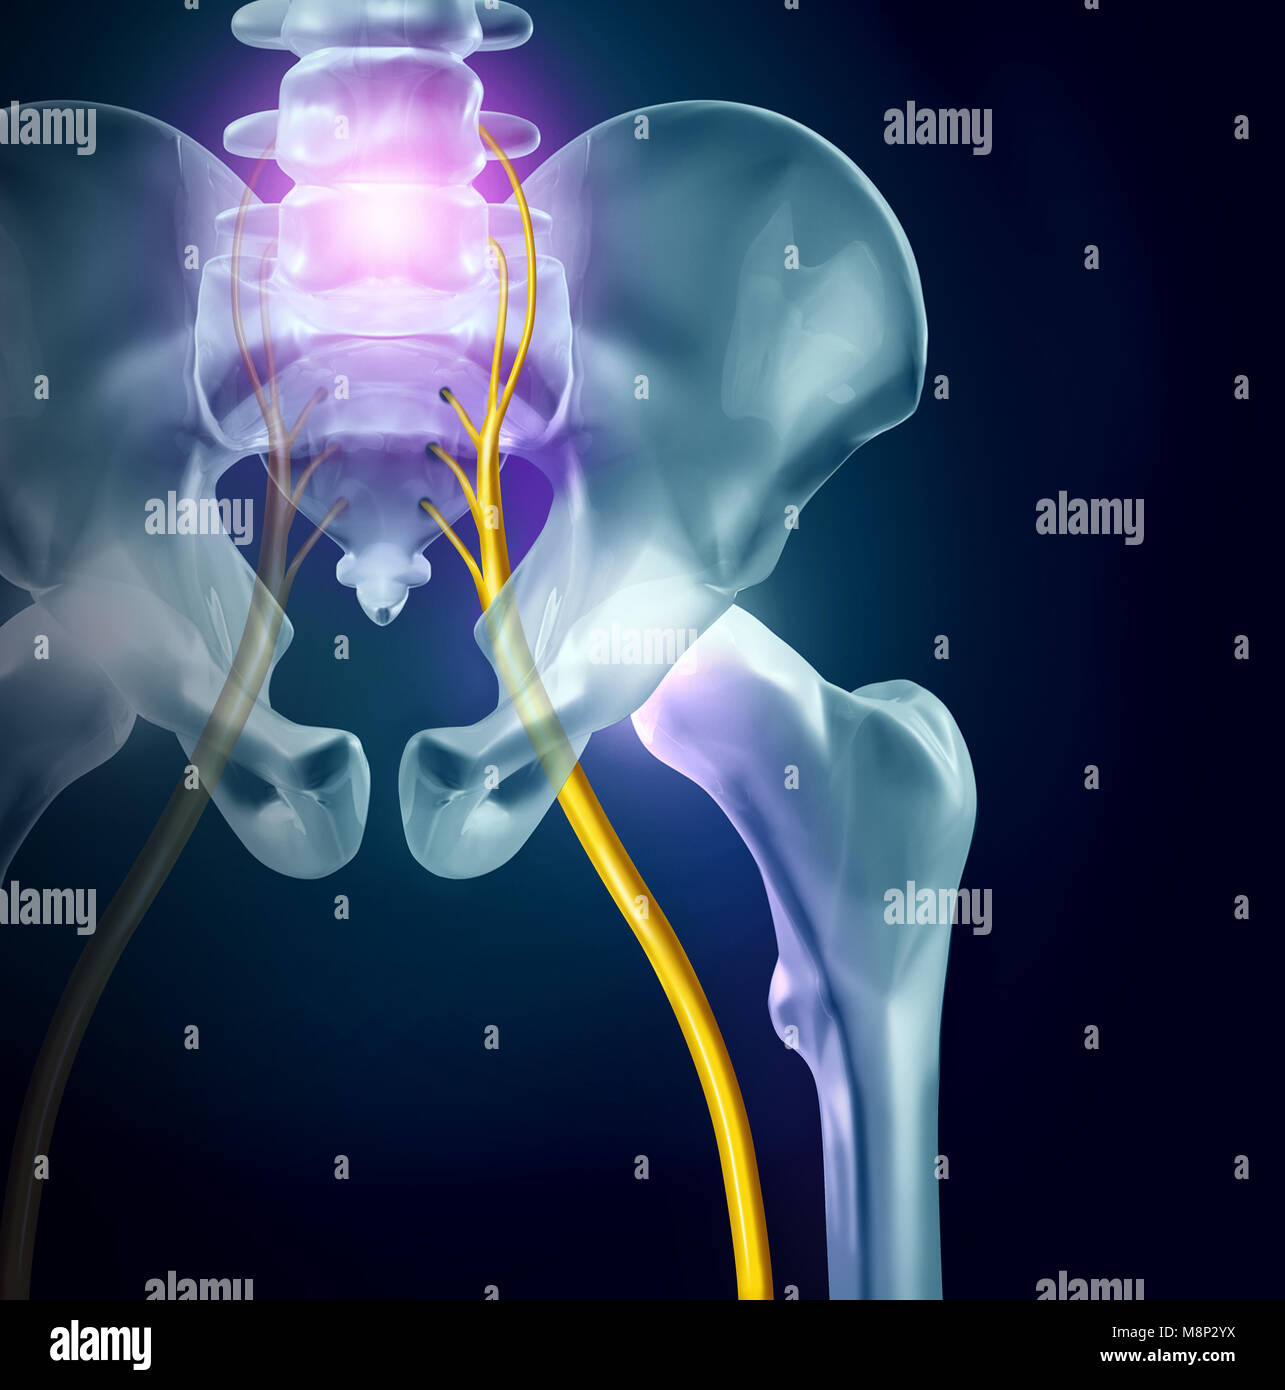 Sciatica pain symptoms and diagnosis medical concept as a disease causing physical problems with 3D illustration elements Stock Photo